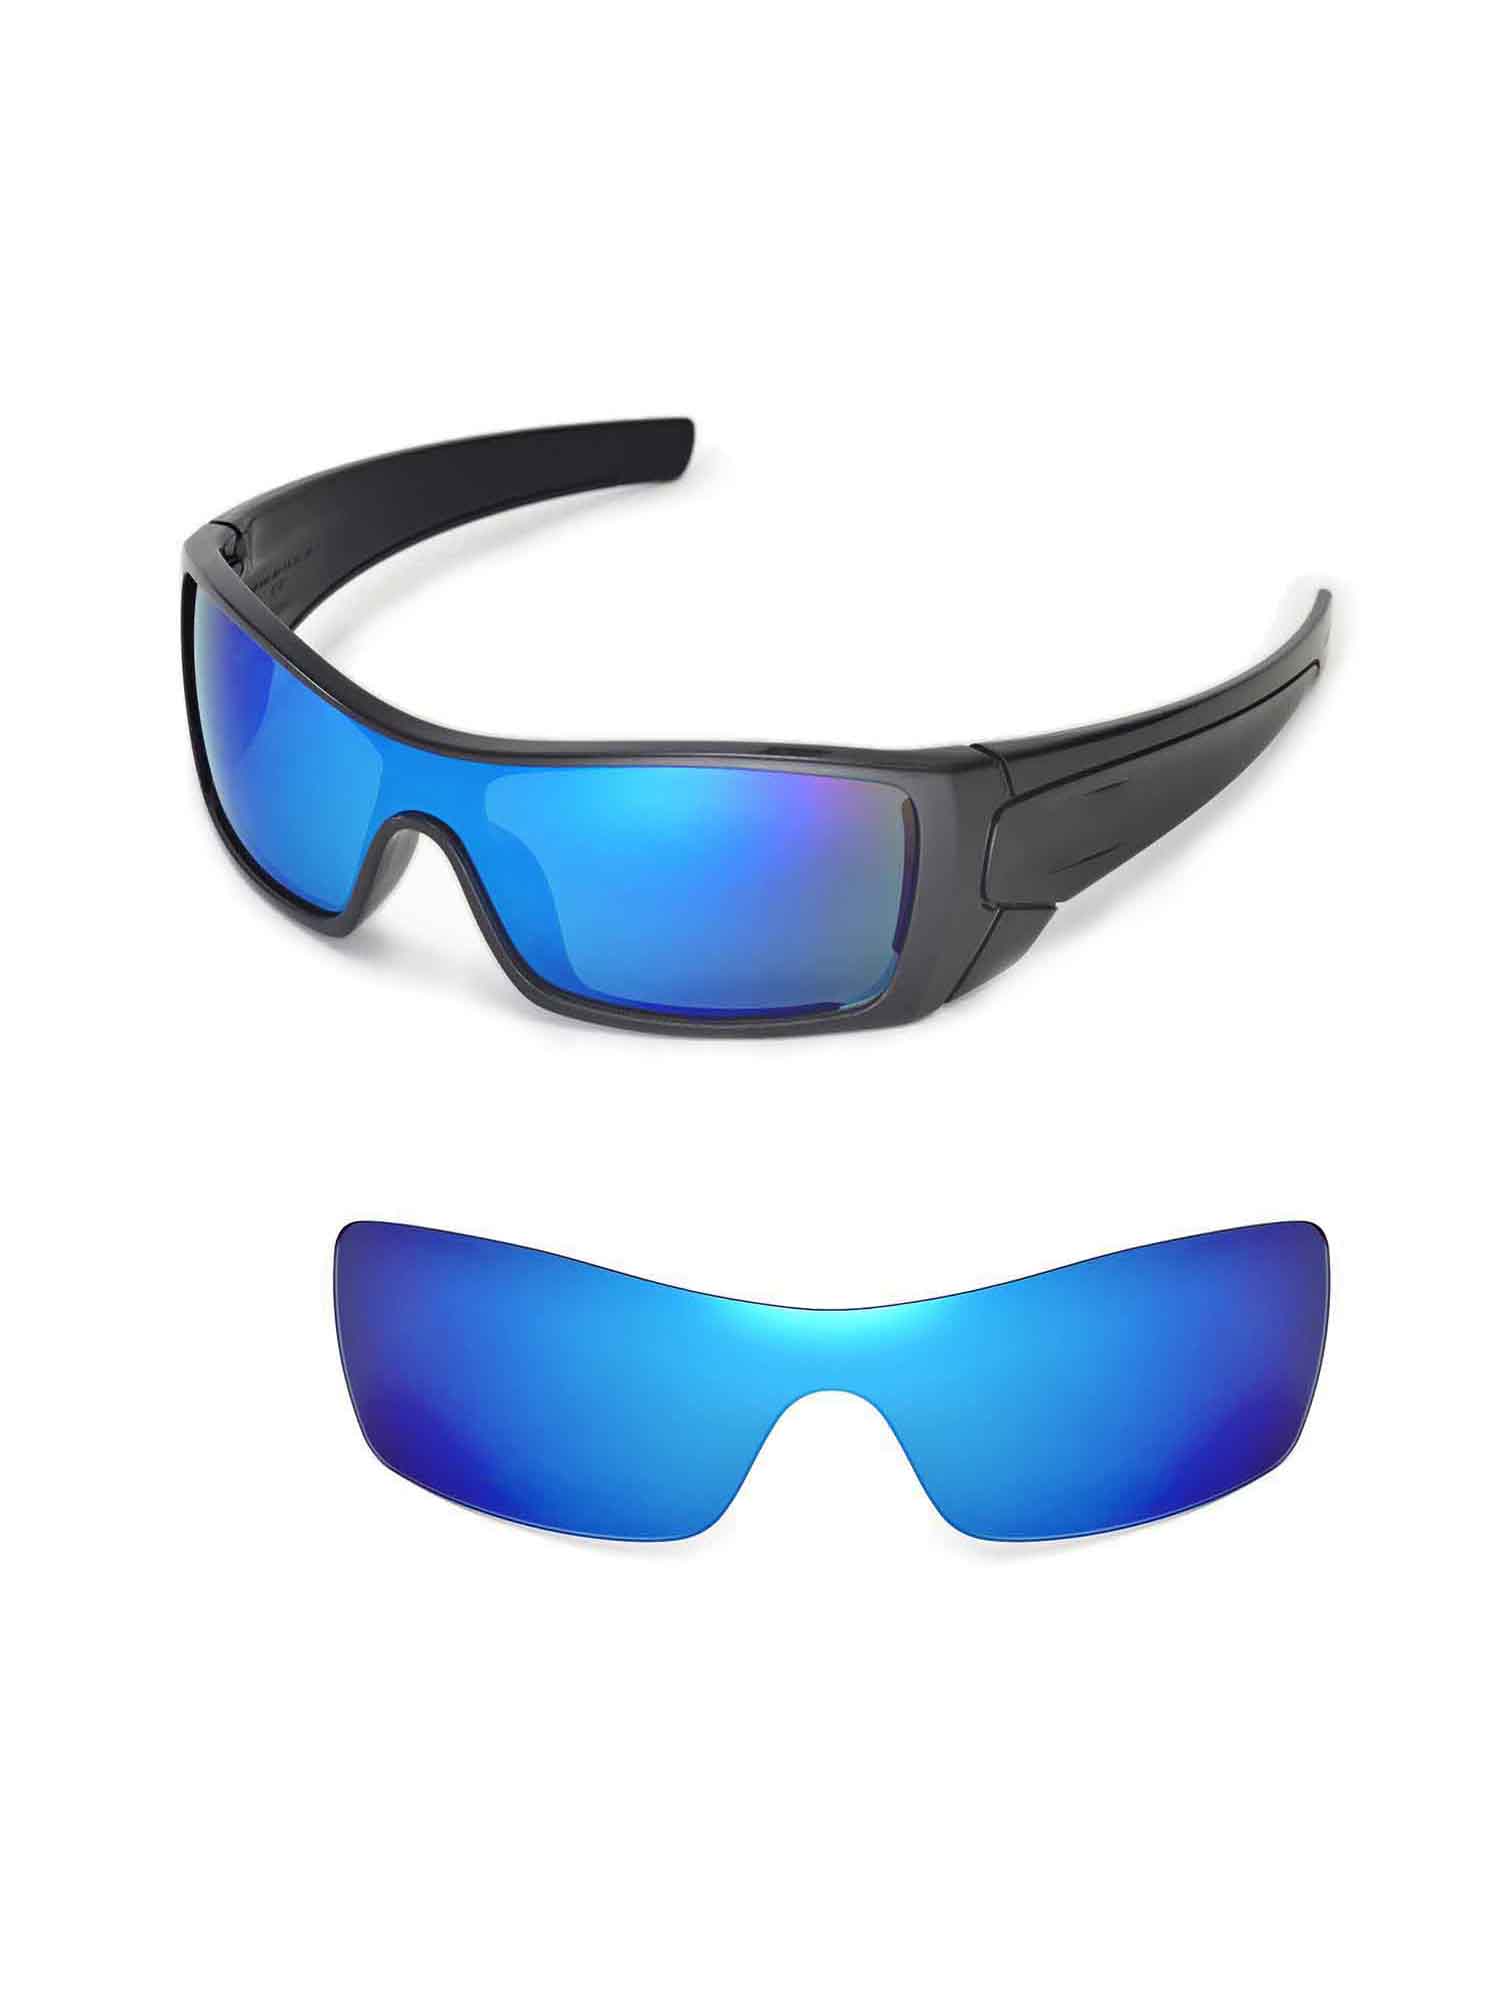 Walleva Ice Blue Polarized Replacement Lenses for Oakley Batwolf Sunglasses - image 1 of 7